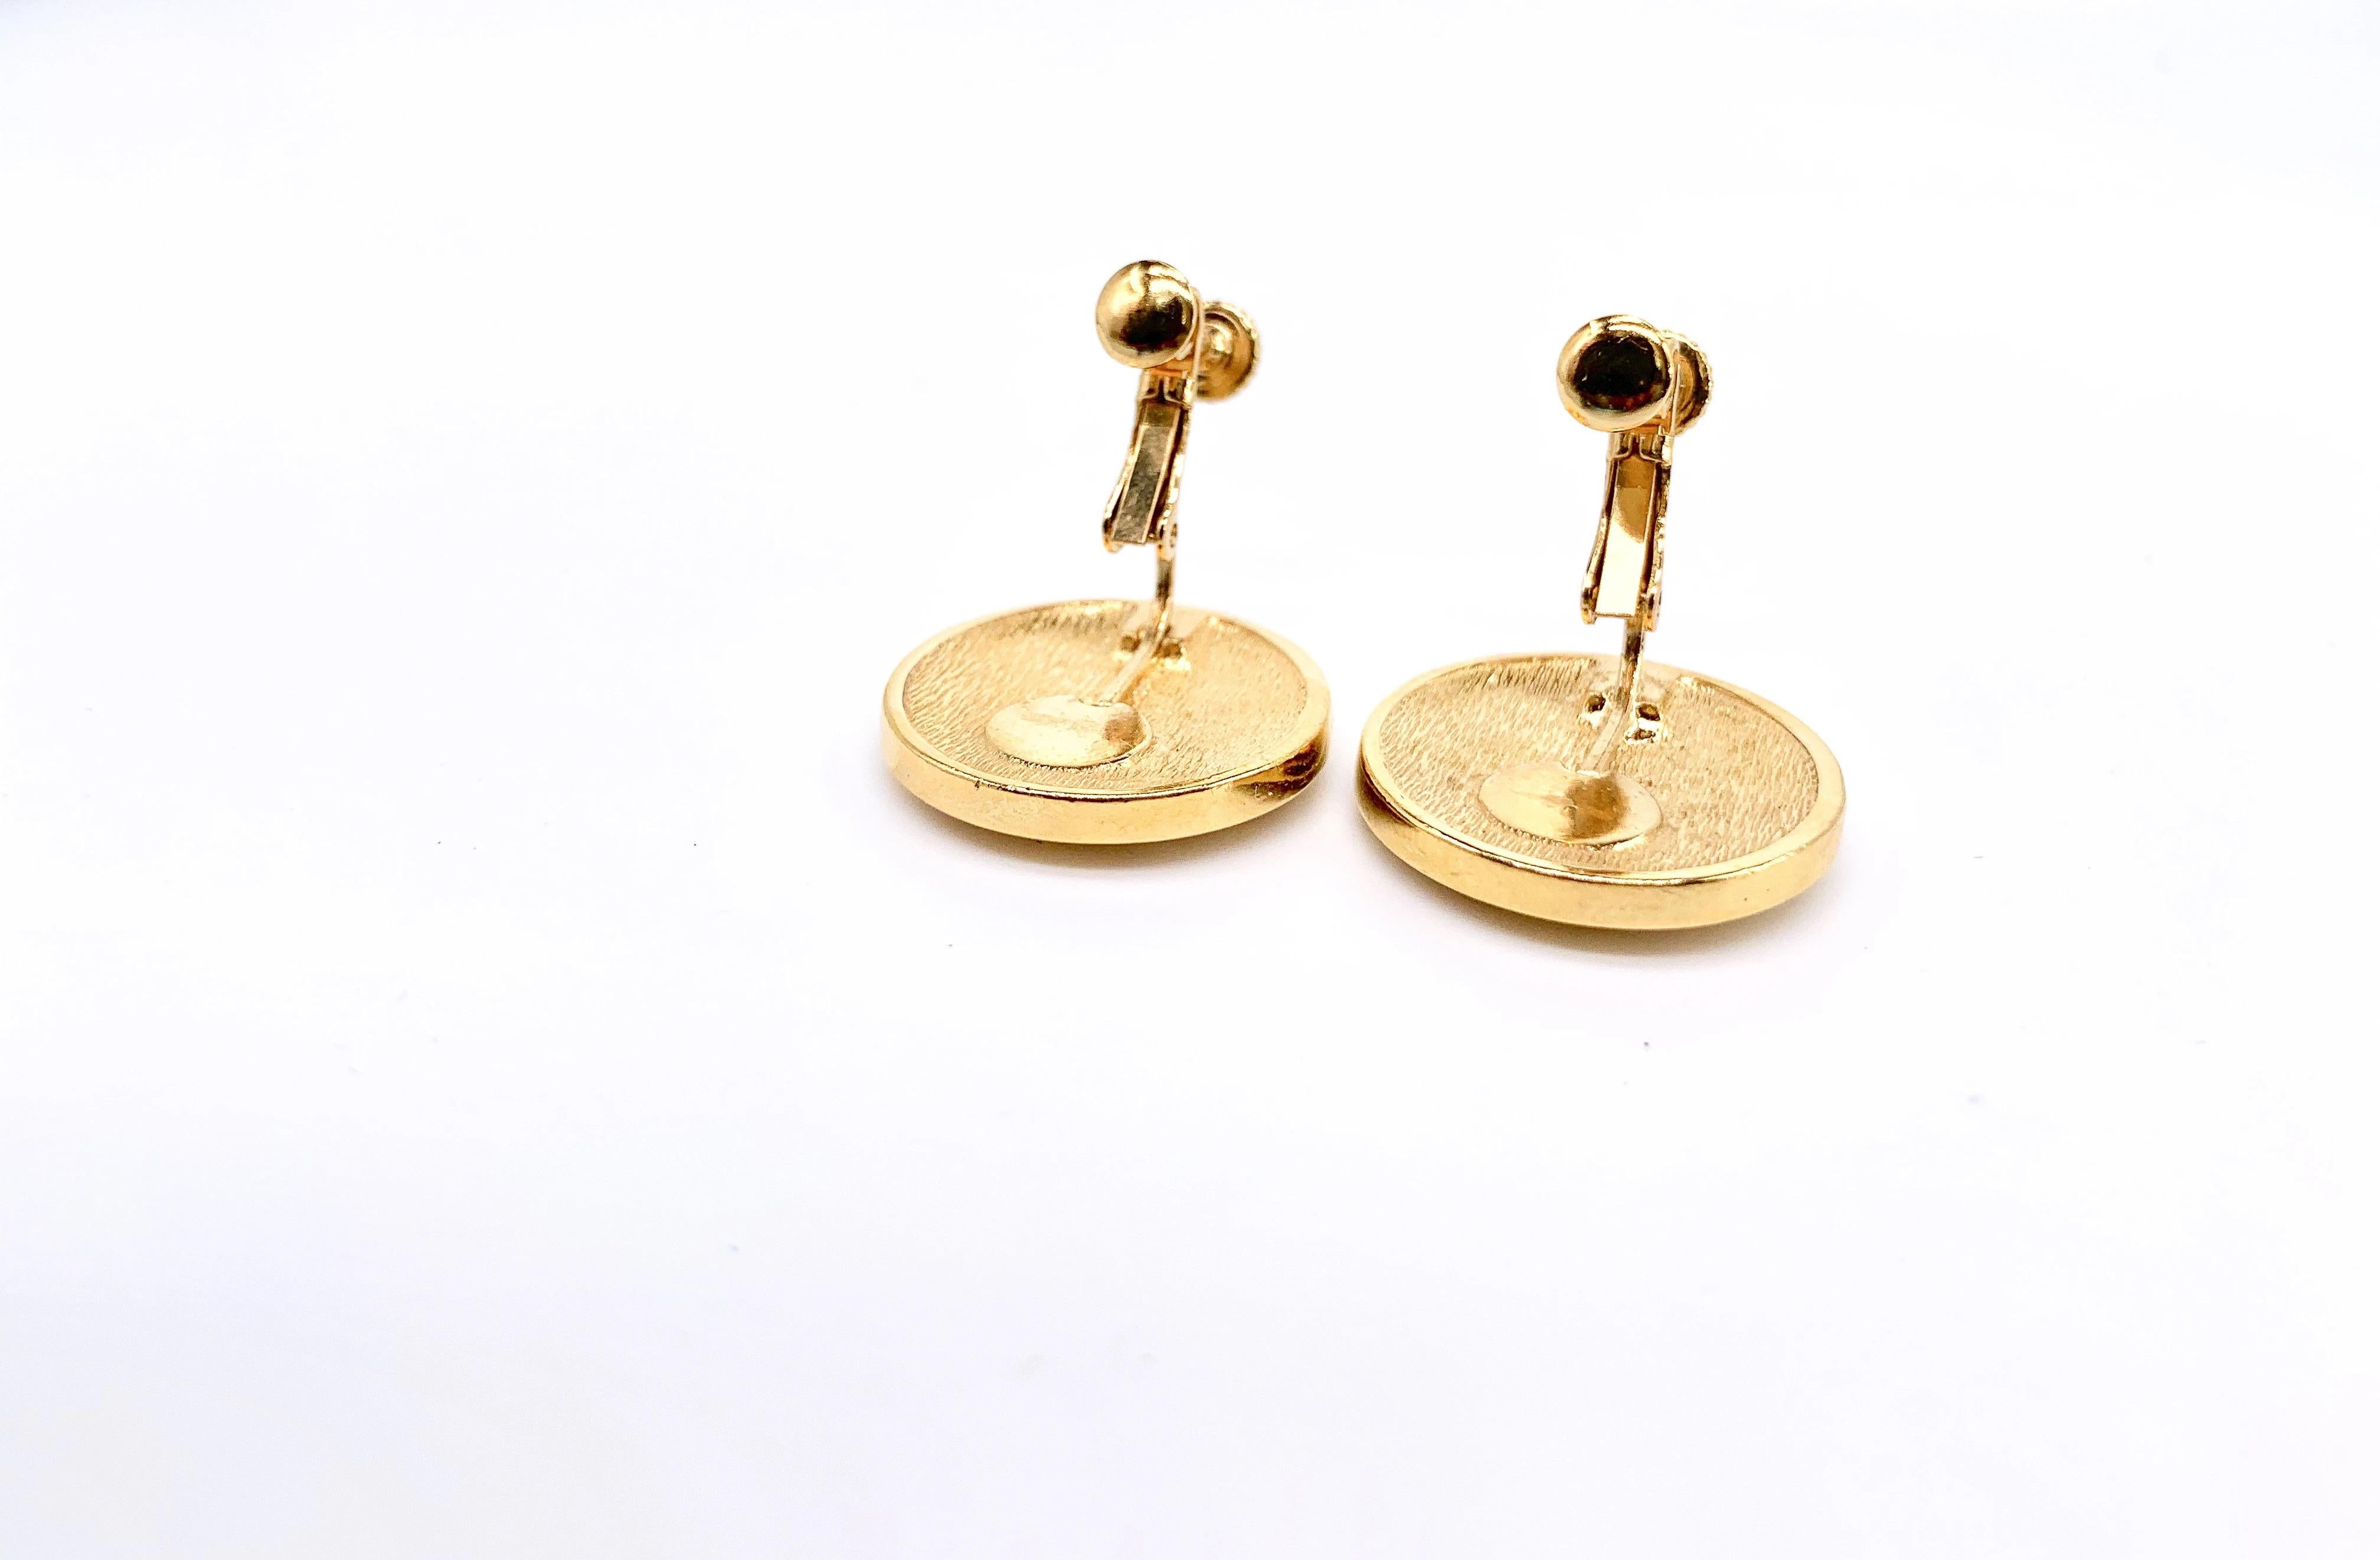 Christian Dior 1980s Vintage Earrings

Details
-Made in the 1980s in Germany 
-Cast from gold plated metal
-Feature the iconic Christian Dior 'CD' initials
-Screw back closure

Size & Fit
Approximately 2.54cm/1inch across, 

Style Notes  
Super